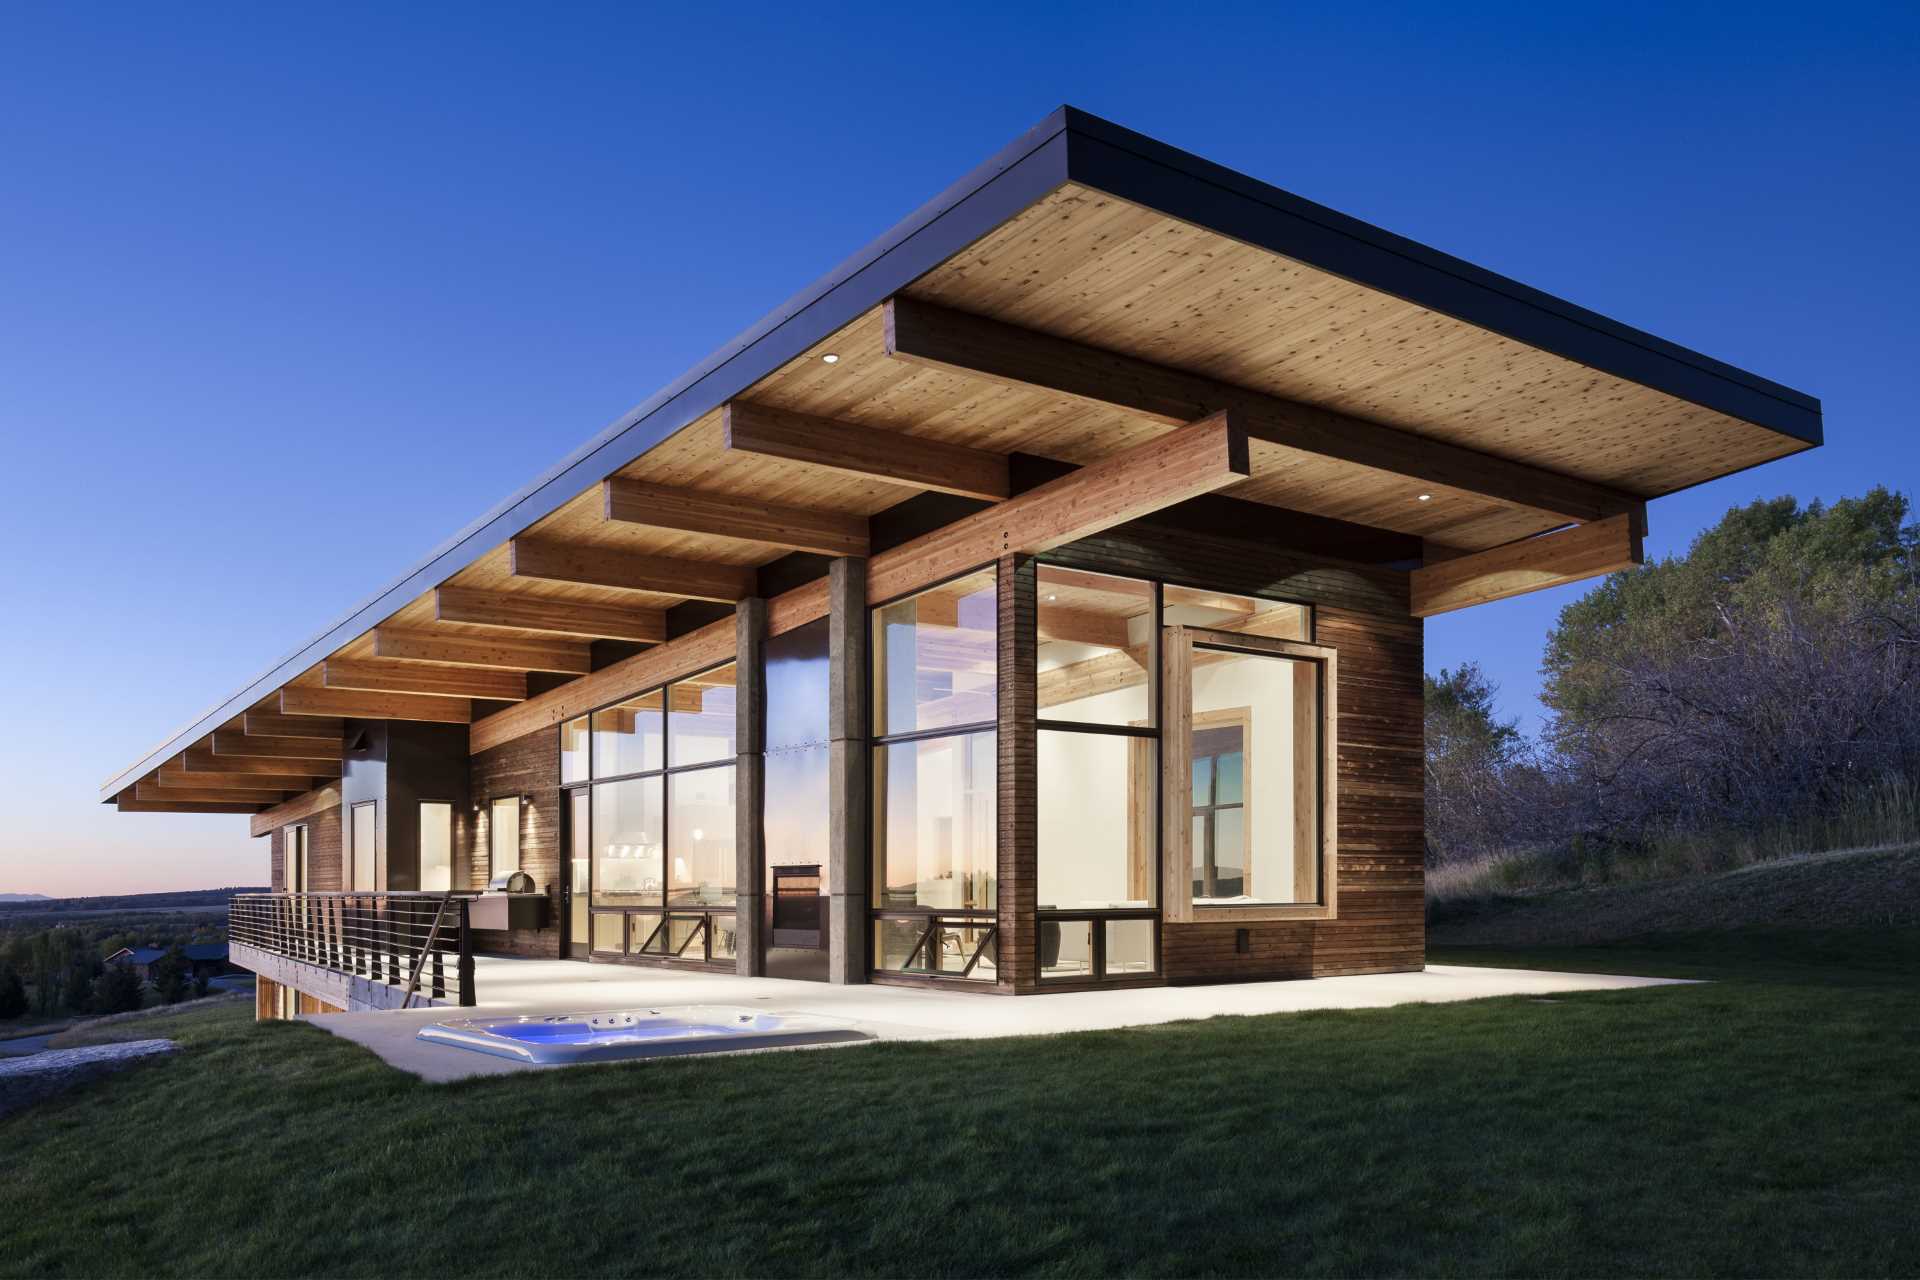 A modern post and beam house with wood siding.